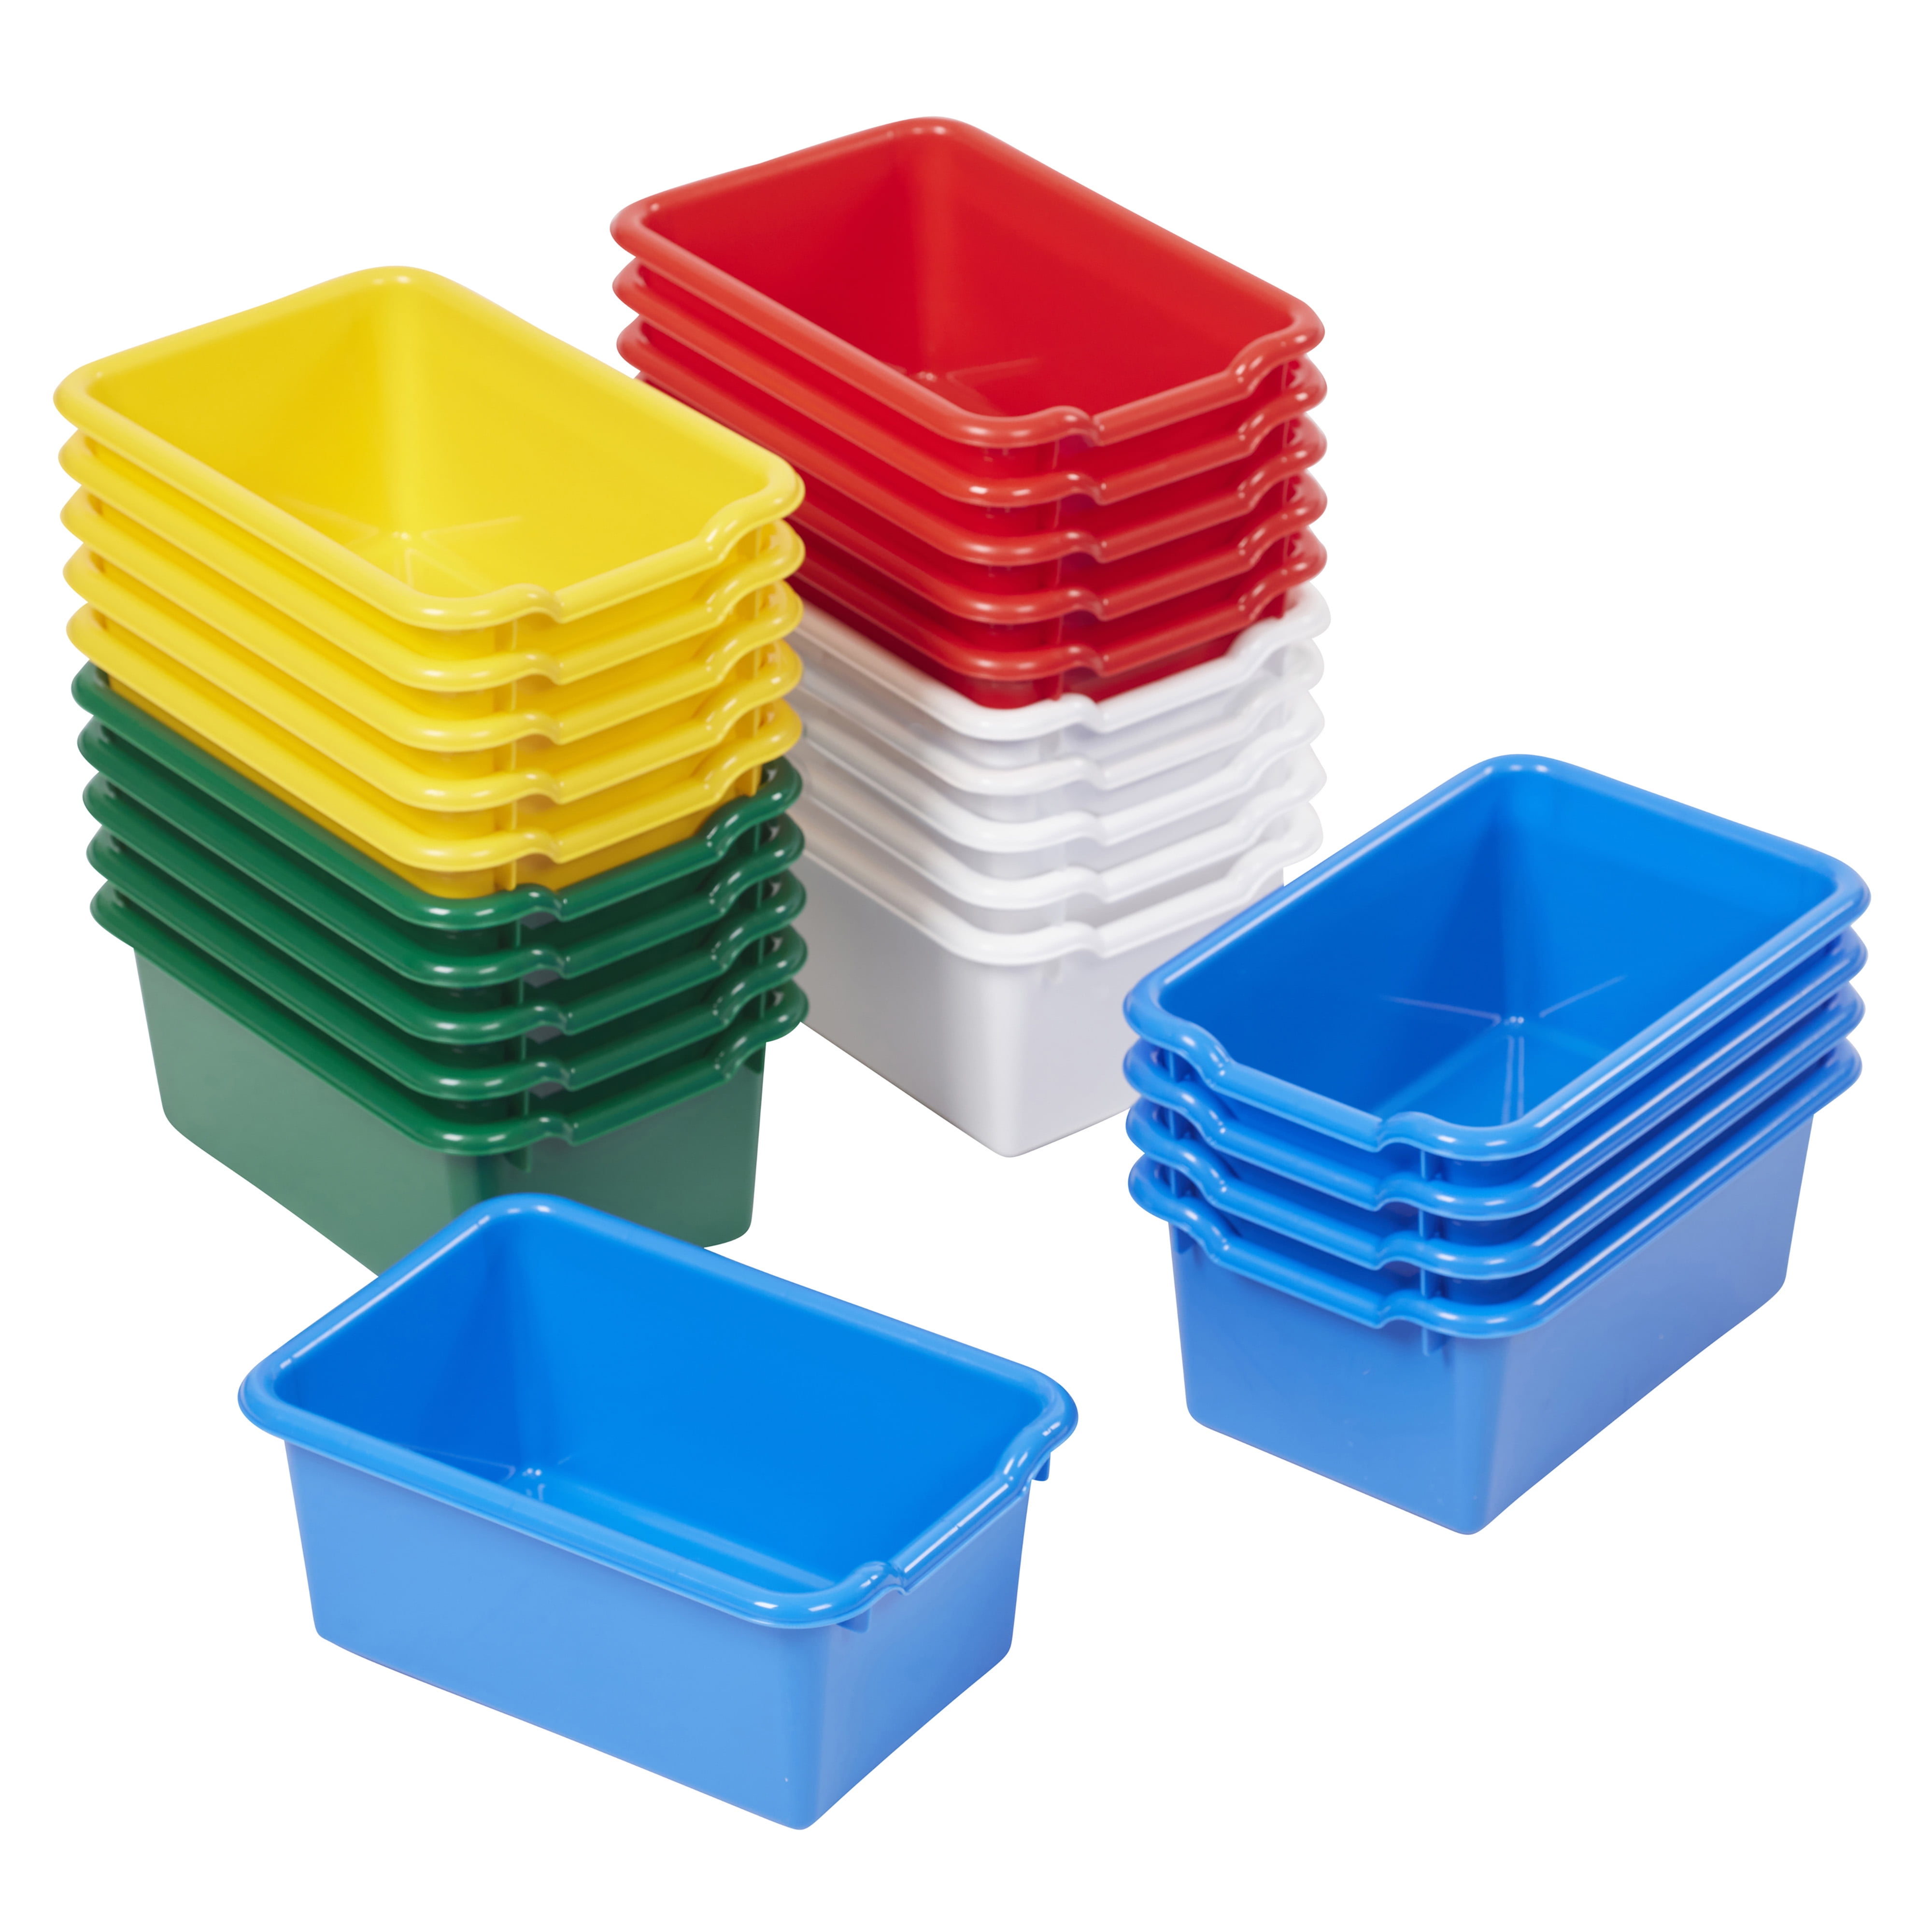 British Made Plastic Order Picking Parts Storage Bins Boxes With Scooped Front 